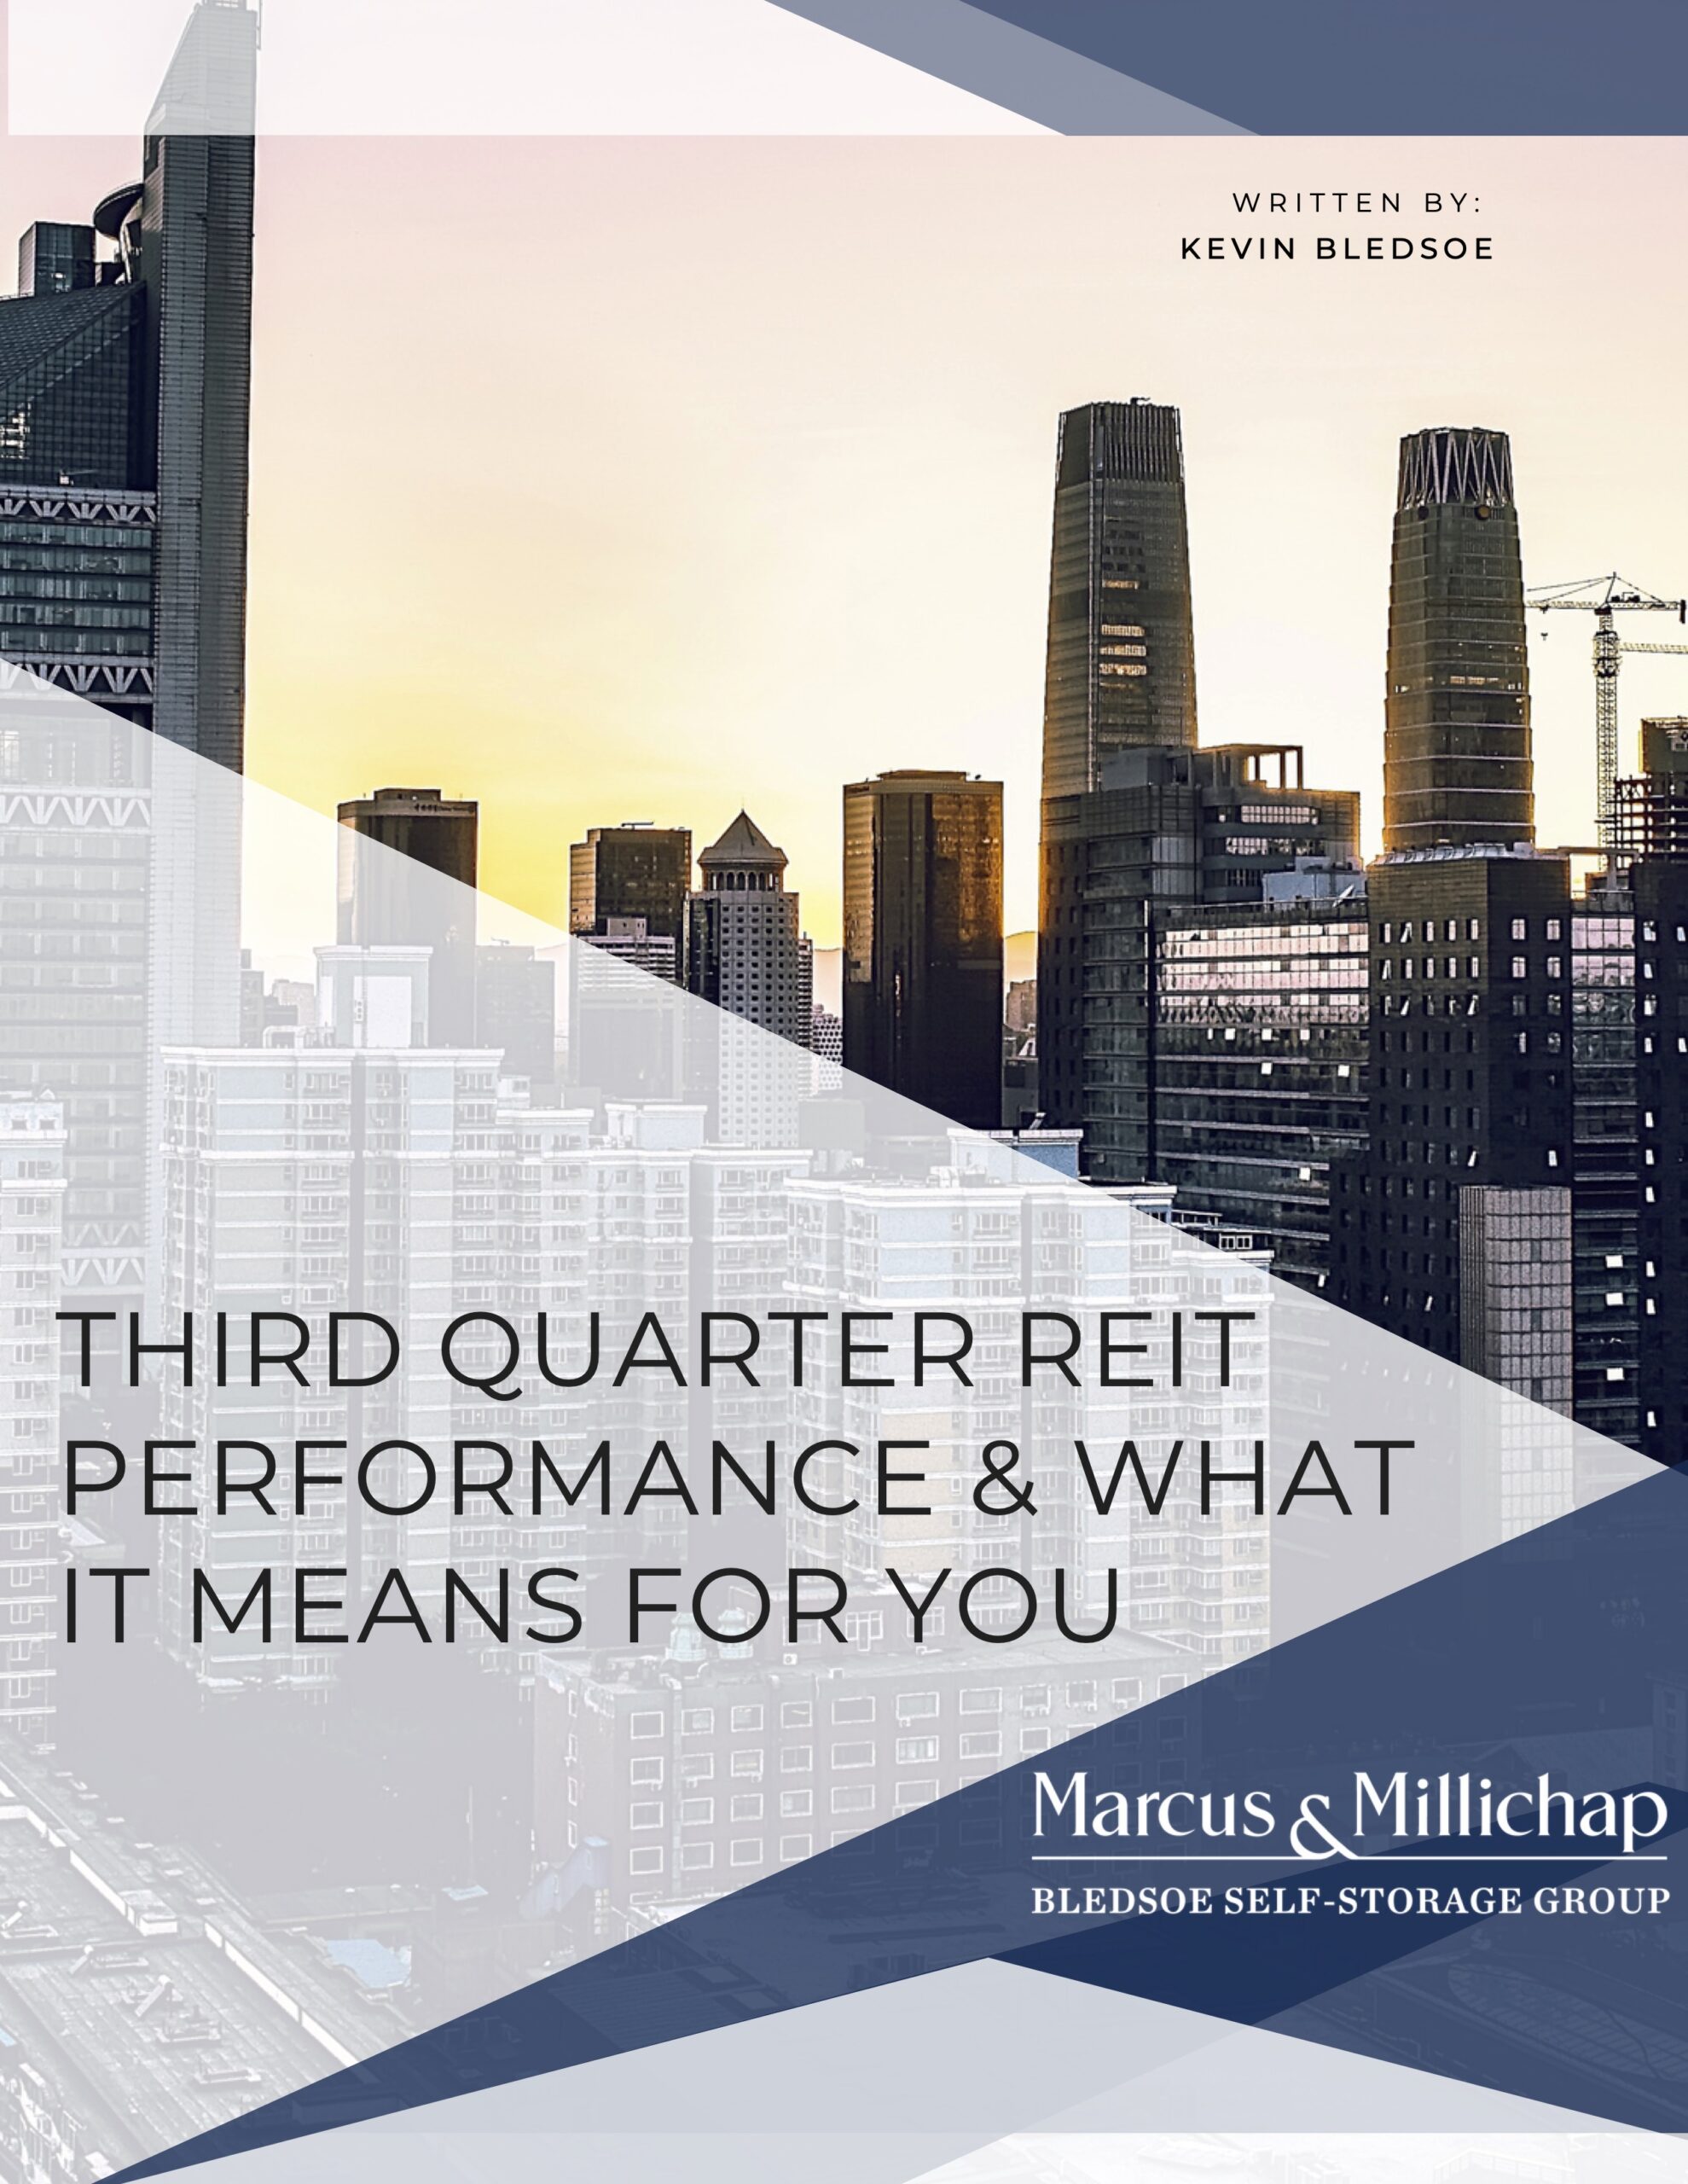 3rdQ REIT Perfomance & What It Means For You-1